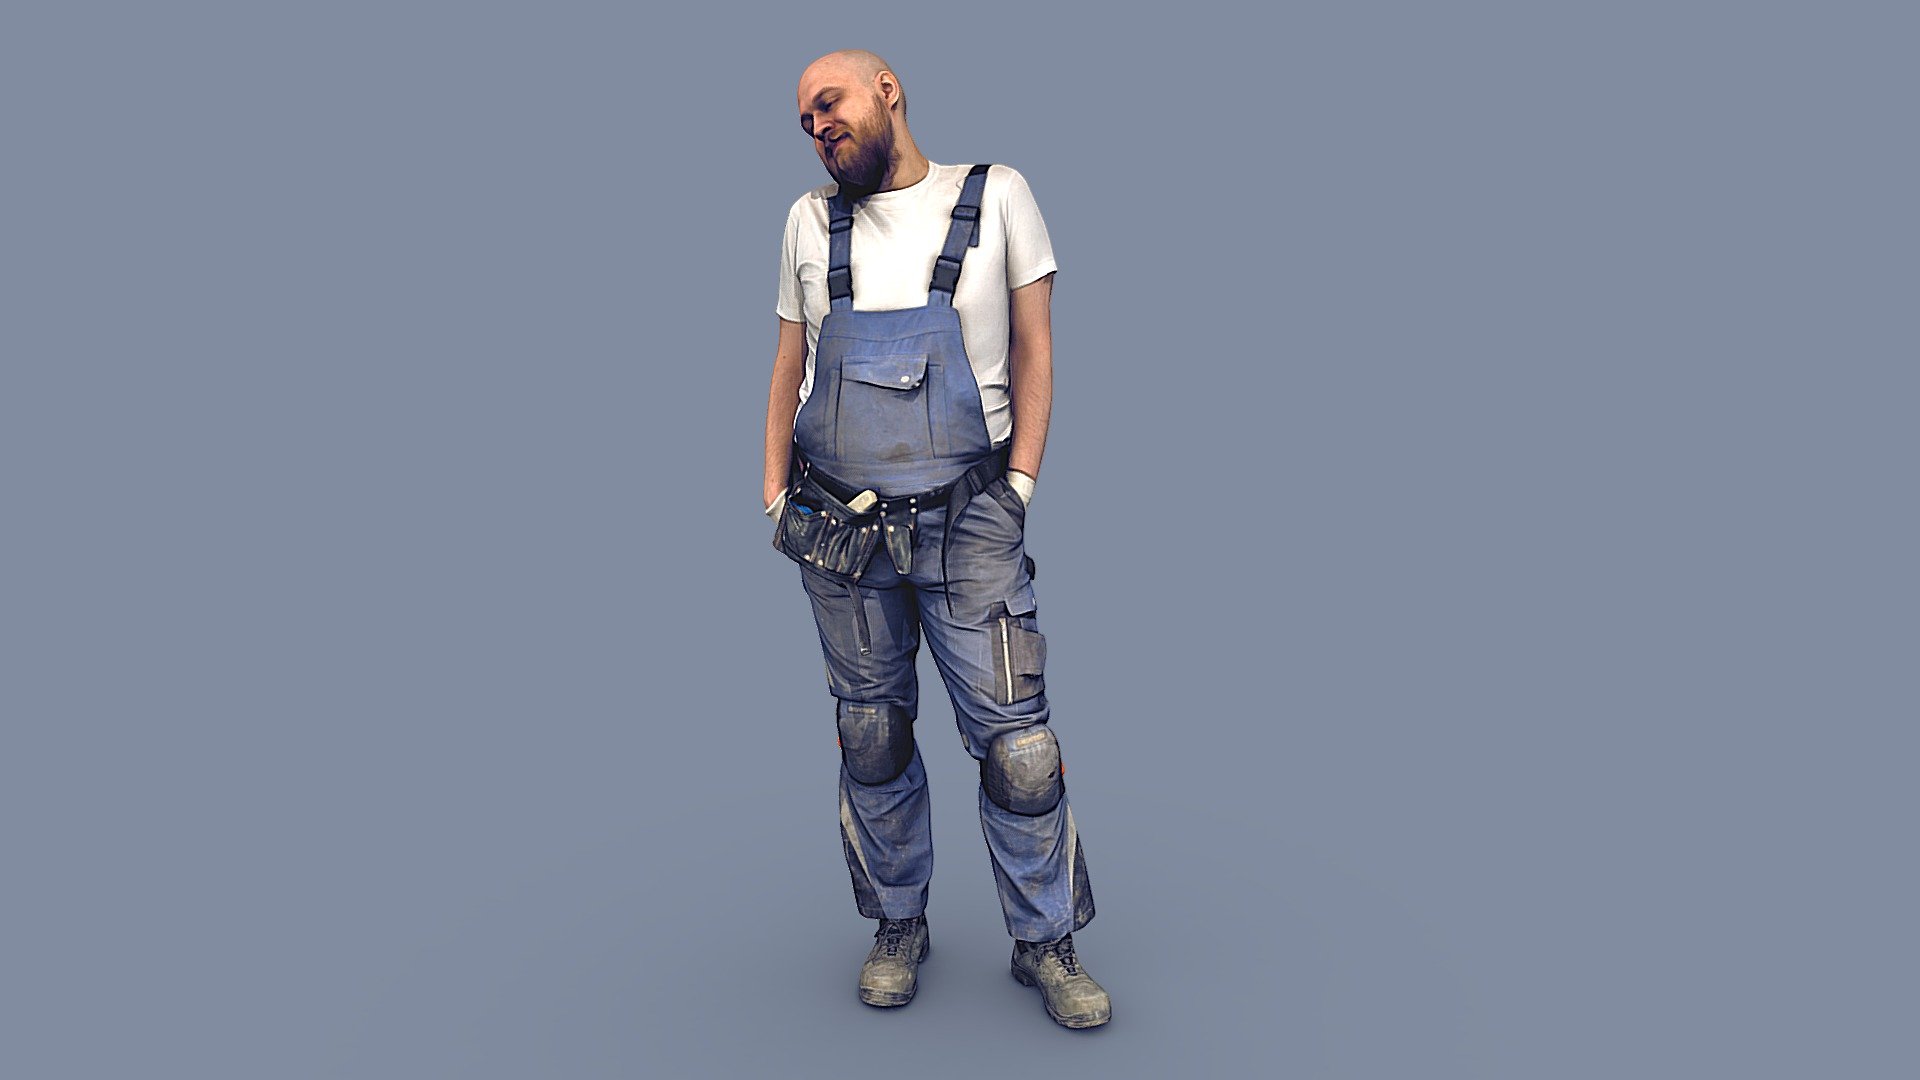 ✉️ A young man, a bald guy with a beard, a builder, a worker, in a working uniform, overalls, with a belt bag with tools, in knee protection, hands in pockets, stands, looks down approvingly.

🦾 This model will be an excellent mid-range participant. It does not need to be very close and try to see the details, it reveals and demonstrates its texture as much as possible in case of a certain distance from the foreground.

⚙️ Photorealistic Construction Worker Character 3d model ready for Virtual Reality (VR), Augmented Reality (AR), games and other real-time apps. Suitable for the architectural visualization and another graphical projects. 50 000 polygons per model 3d model